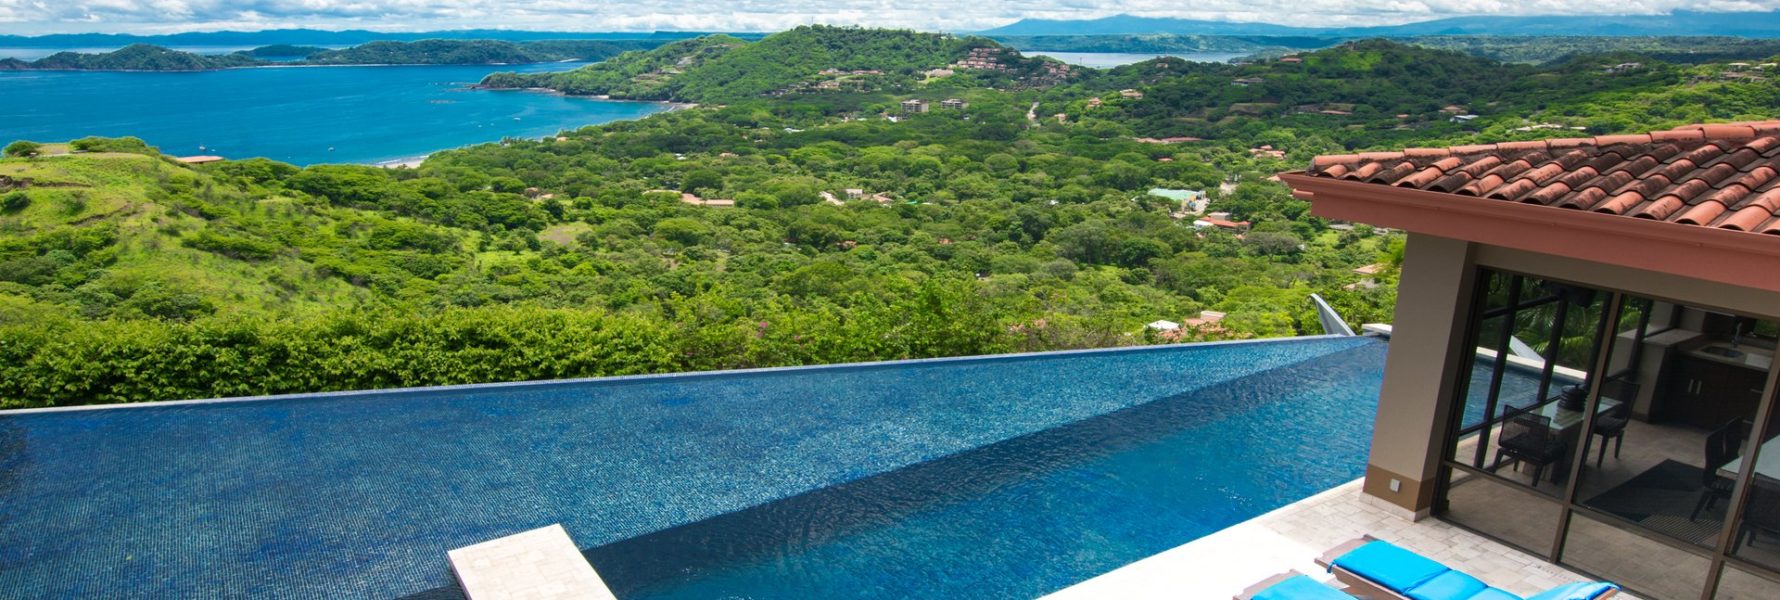 Check this out! Dreams can come true. Stay with us in Costa Rica while at papagayo